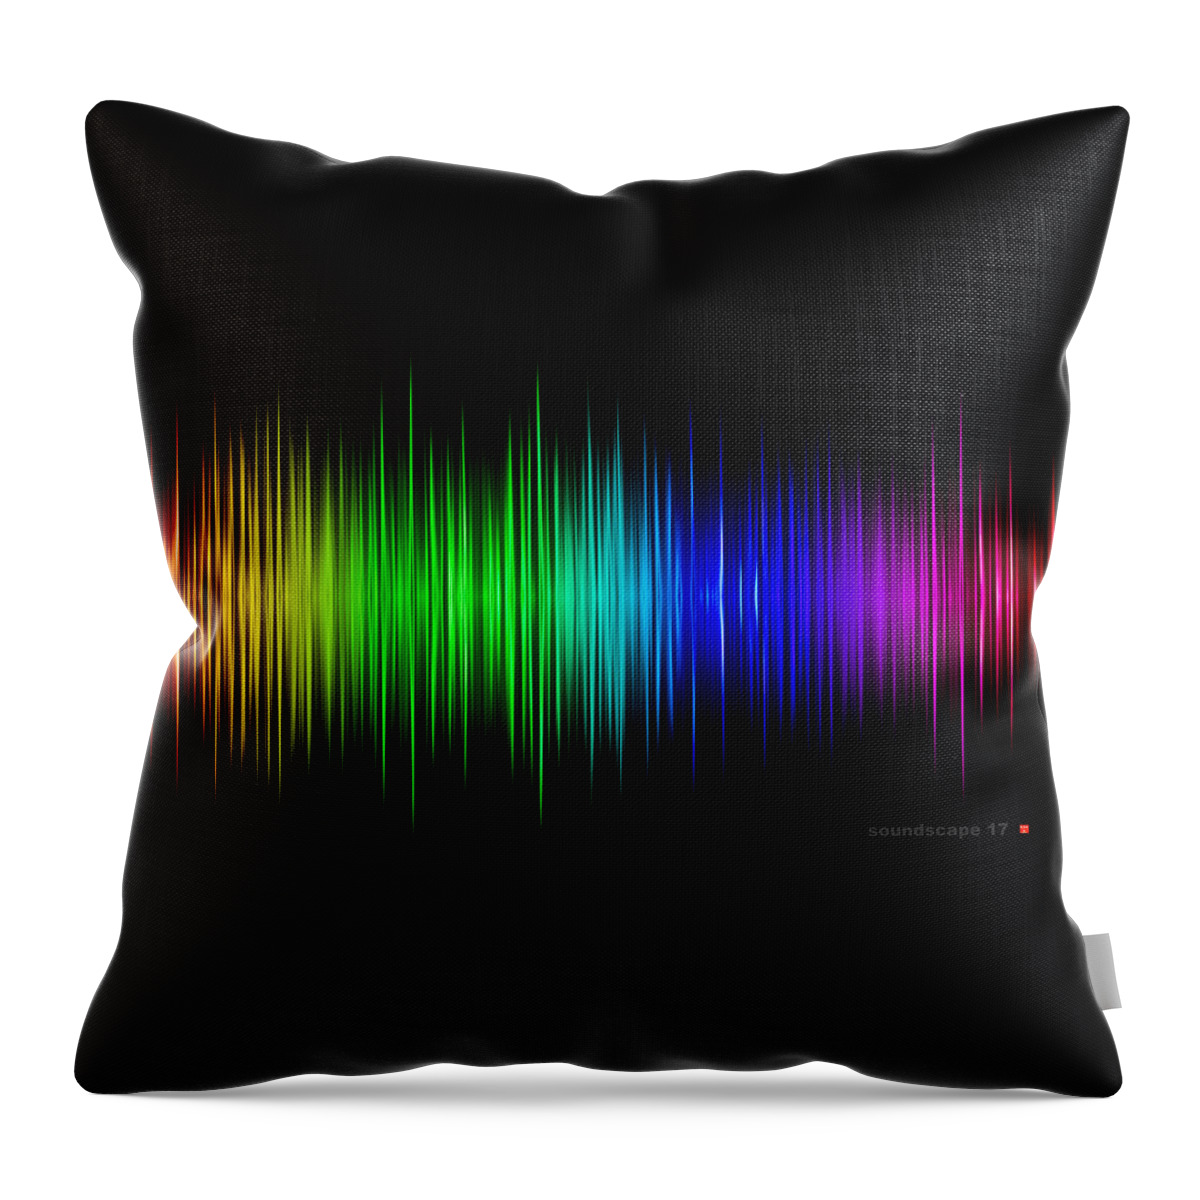 Multi-color Soundwave Throw Pillow featuring the painting Soundscape 17 by Ran Andrews